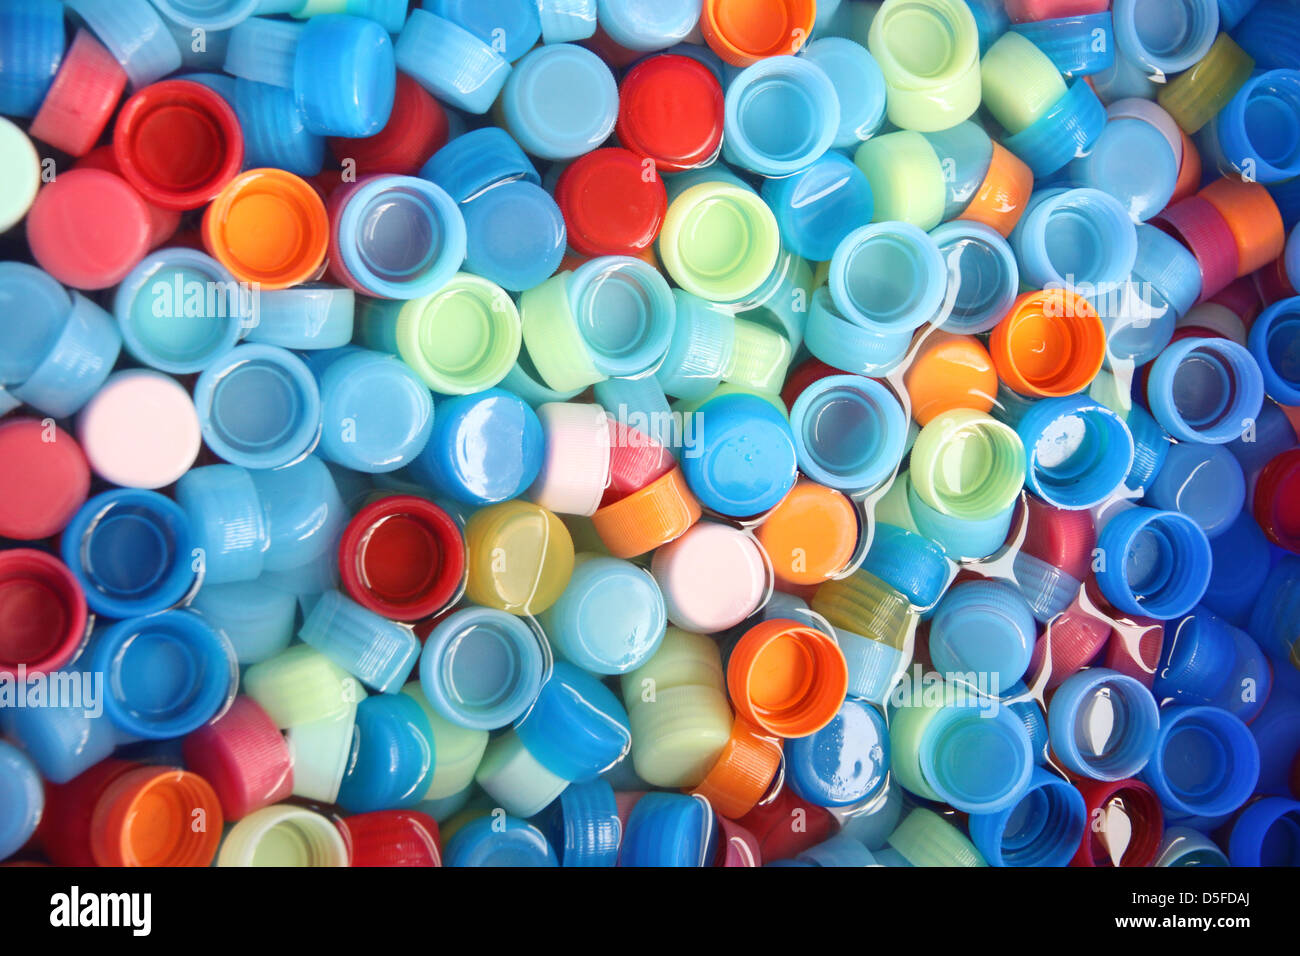 In many colors bottle caps with caps in four colors. Stock Photo